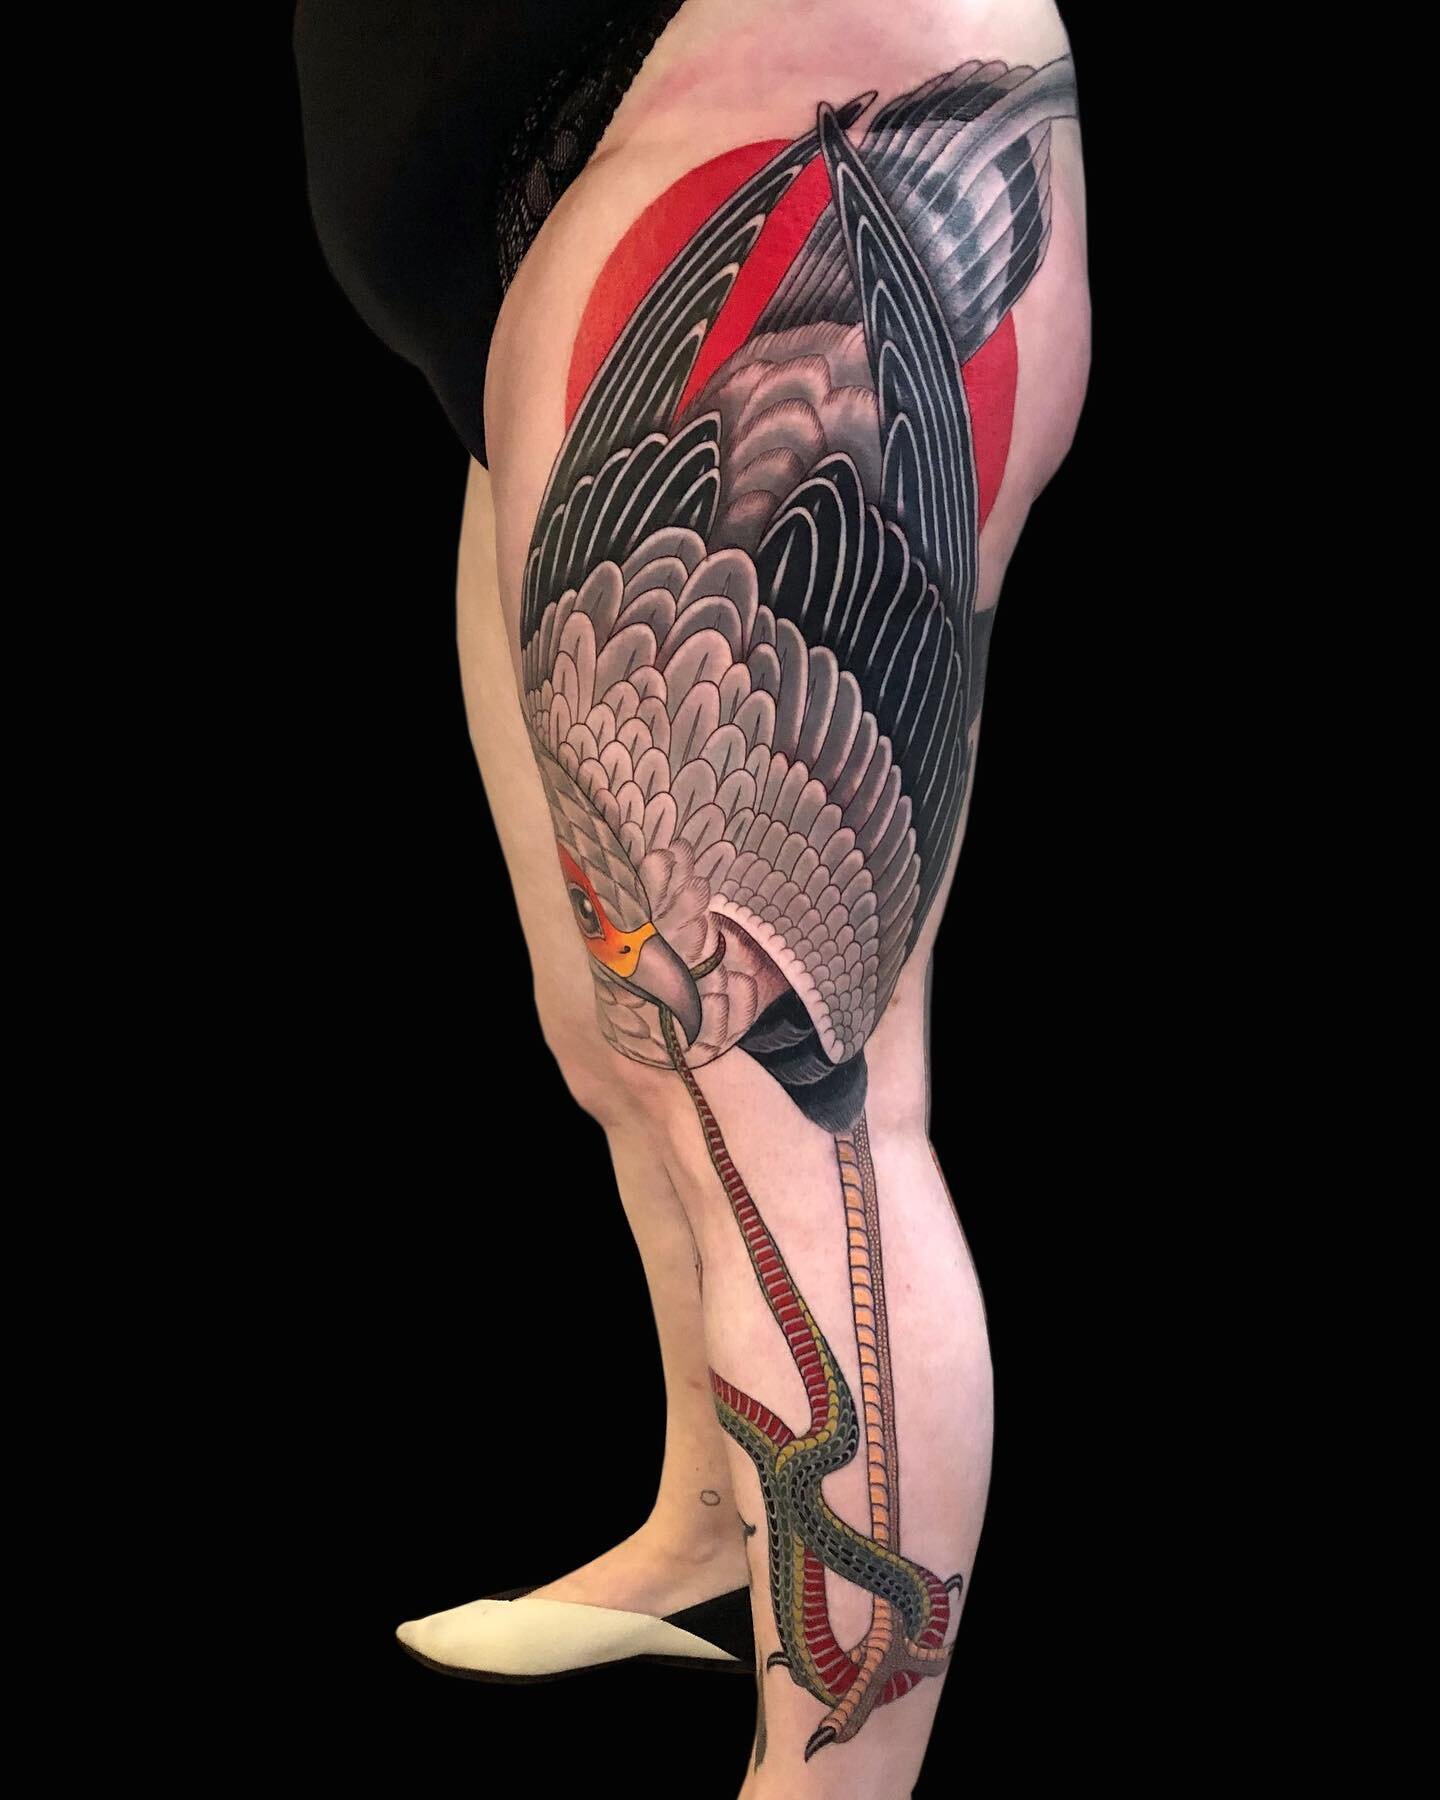 Sagittarius Serpentarius (Secretary Bird) hunting a snake down 🐍 

One of my favourite pieces from the past year. Love the big scale we went with. Thank you Charlie, I so enjoyed our sessions! 🔥

Very much looking forward to getting back to tattooi